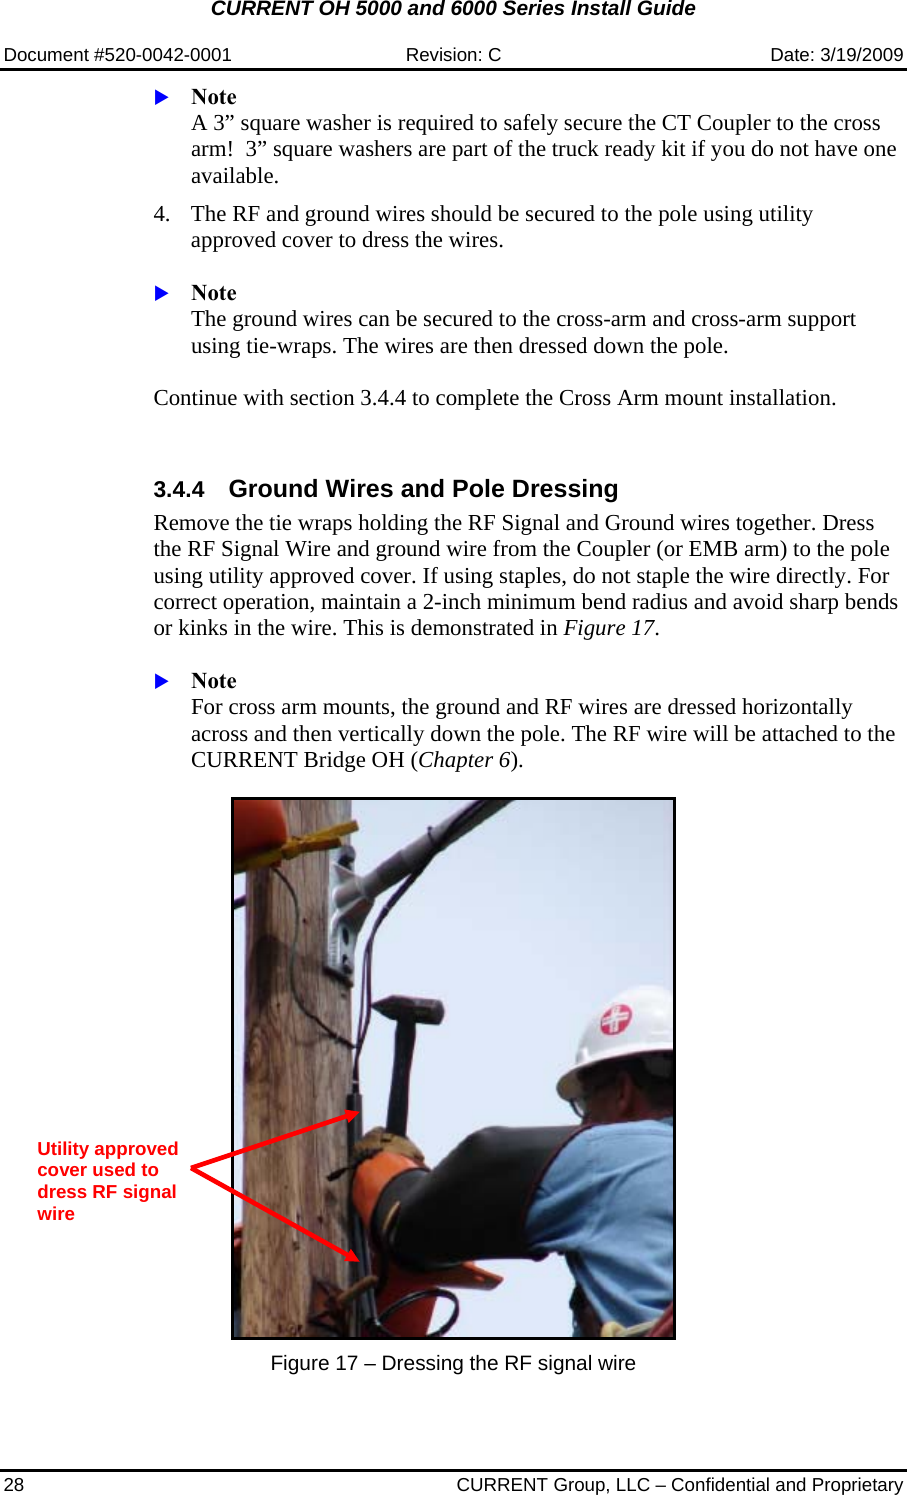 CURRENT OH 5000 and 6000 Series Install Guide  Document #520-0042-0001  Revision: C  Date: 3/19/2009 28  CURRENT Group, LLC – Confidential and Proprietary  X Note  A 3” square washer is required to safely secure the CT Coupler to the cross arm!  3” square washers are part of the truck ready kit if you do not have one available.  4. The RF and ground wires should be secured to the pole using utility approved cover to dress the wires.   X Note  The ground wires can be secured to the cross-arm and cross-arm support using tie-wraps. The wires are then dressed down the pole.   Continue with section 3.4.4 to complete the Cross Arm mount installation.   3.4.4  Ground Wires and Pole Dressing Remove the tie wraps holding the RF Signal and Ground wires together. Dress the RF Signal Wire and ground wire from the Coupler (or EMB arm) to the pole using utility approved cover. If using staples, do not staple the wire directly. For correct operation, maintain a 2-inch minimum bend radius and avoid sharp bends or kinks in the wire. This is demonstrated in Figure 17.  X Note  For cross arm mounts, the ground and RF wires are dressed horizontally across and then vertically down the pole. The RF wire will be attached to the CURRENT Bridge OH (Chapter 6).     Figure 17 – Dressing the RF signal wire   Utility approved cover used to dress RF signal wire 